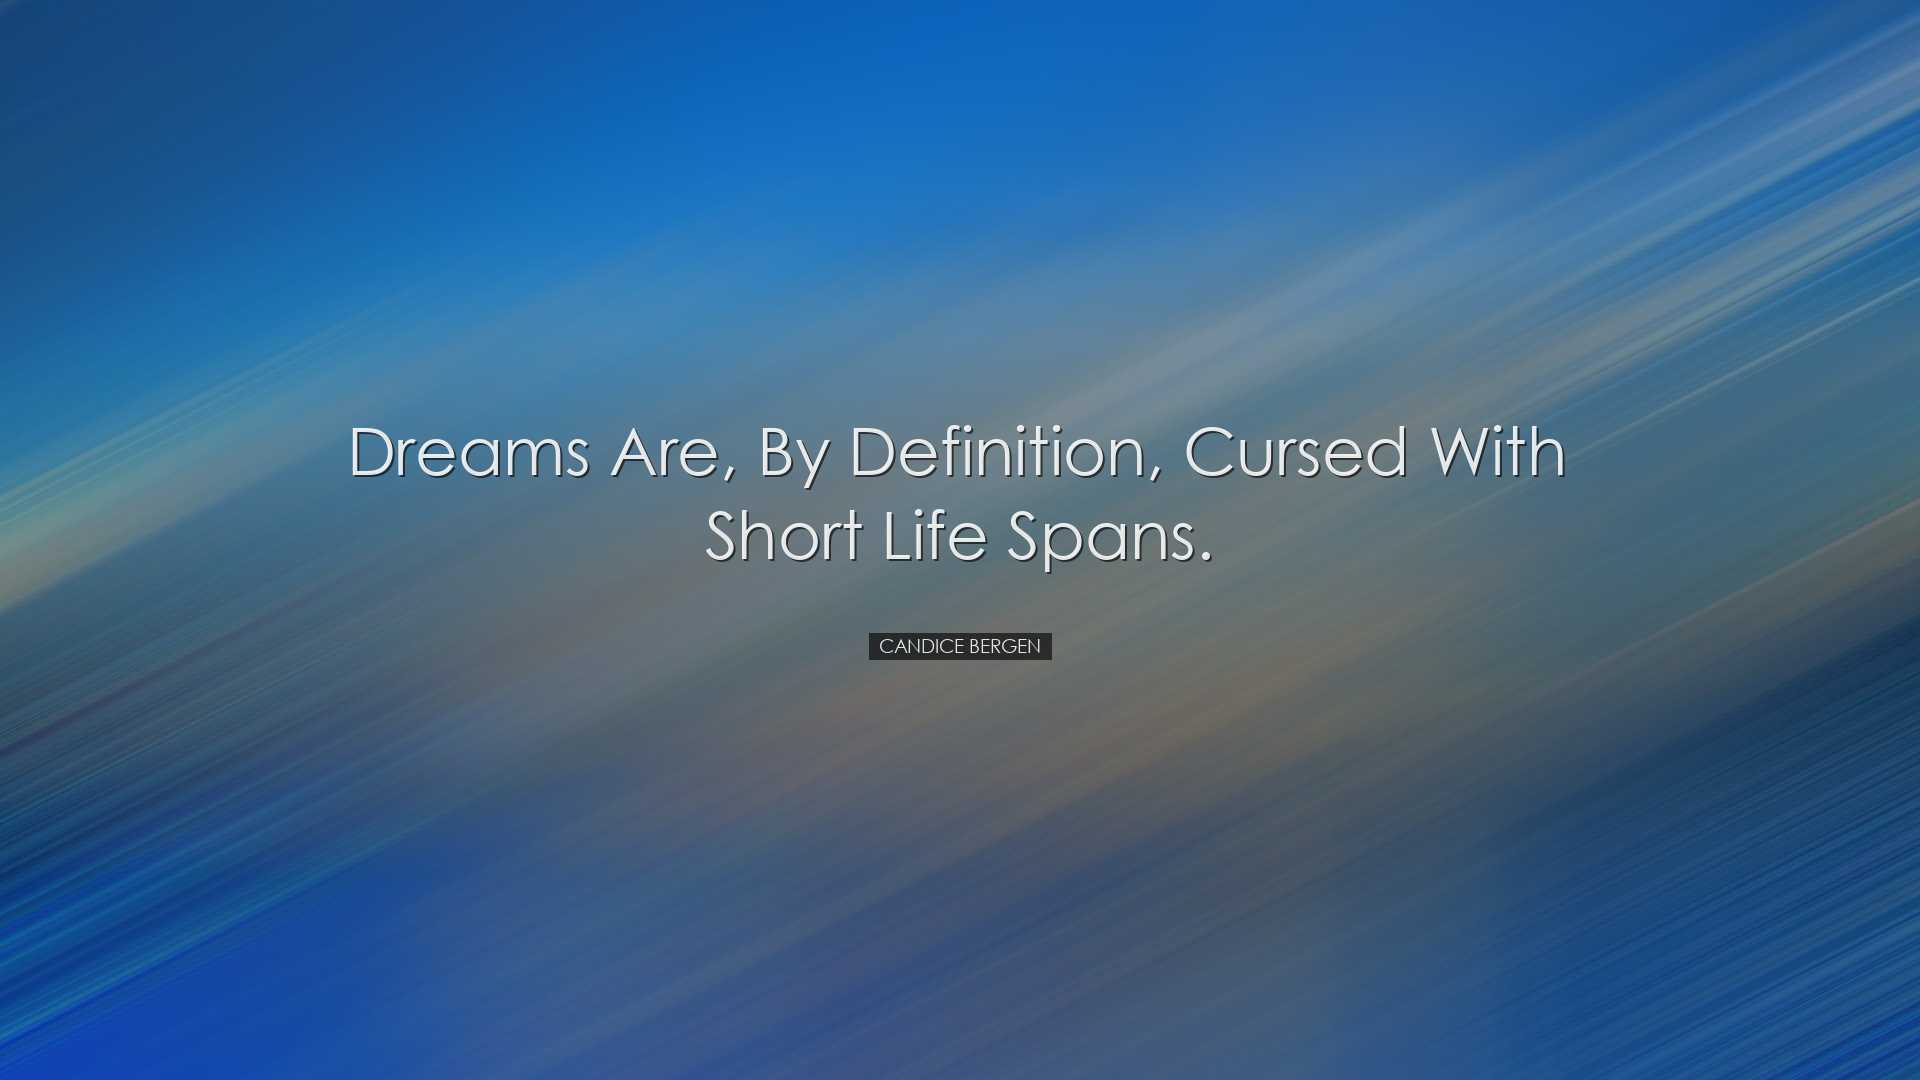 Dreams are, by definition, cursed with short life spans. - Candice